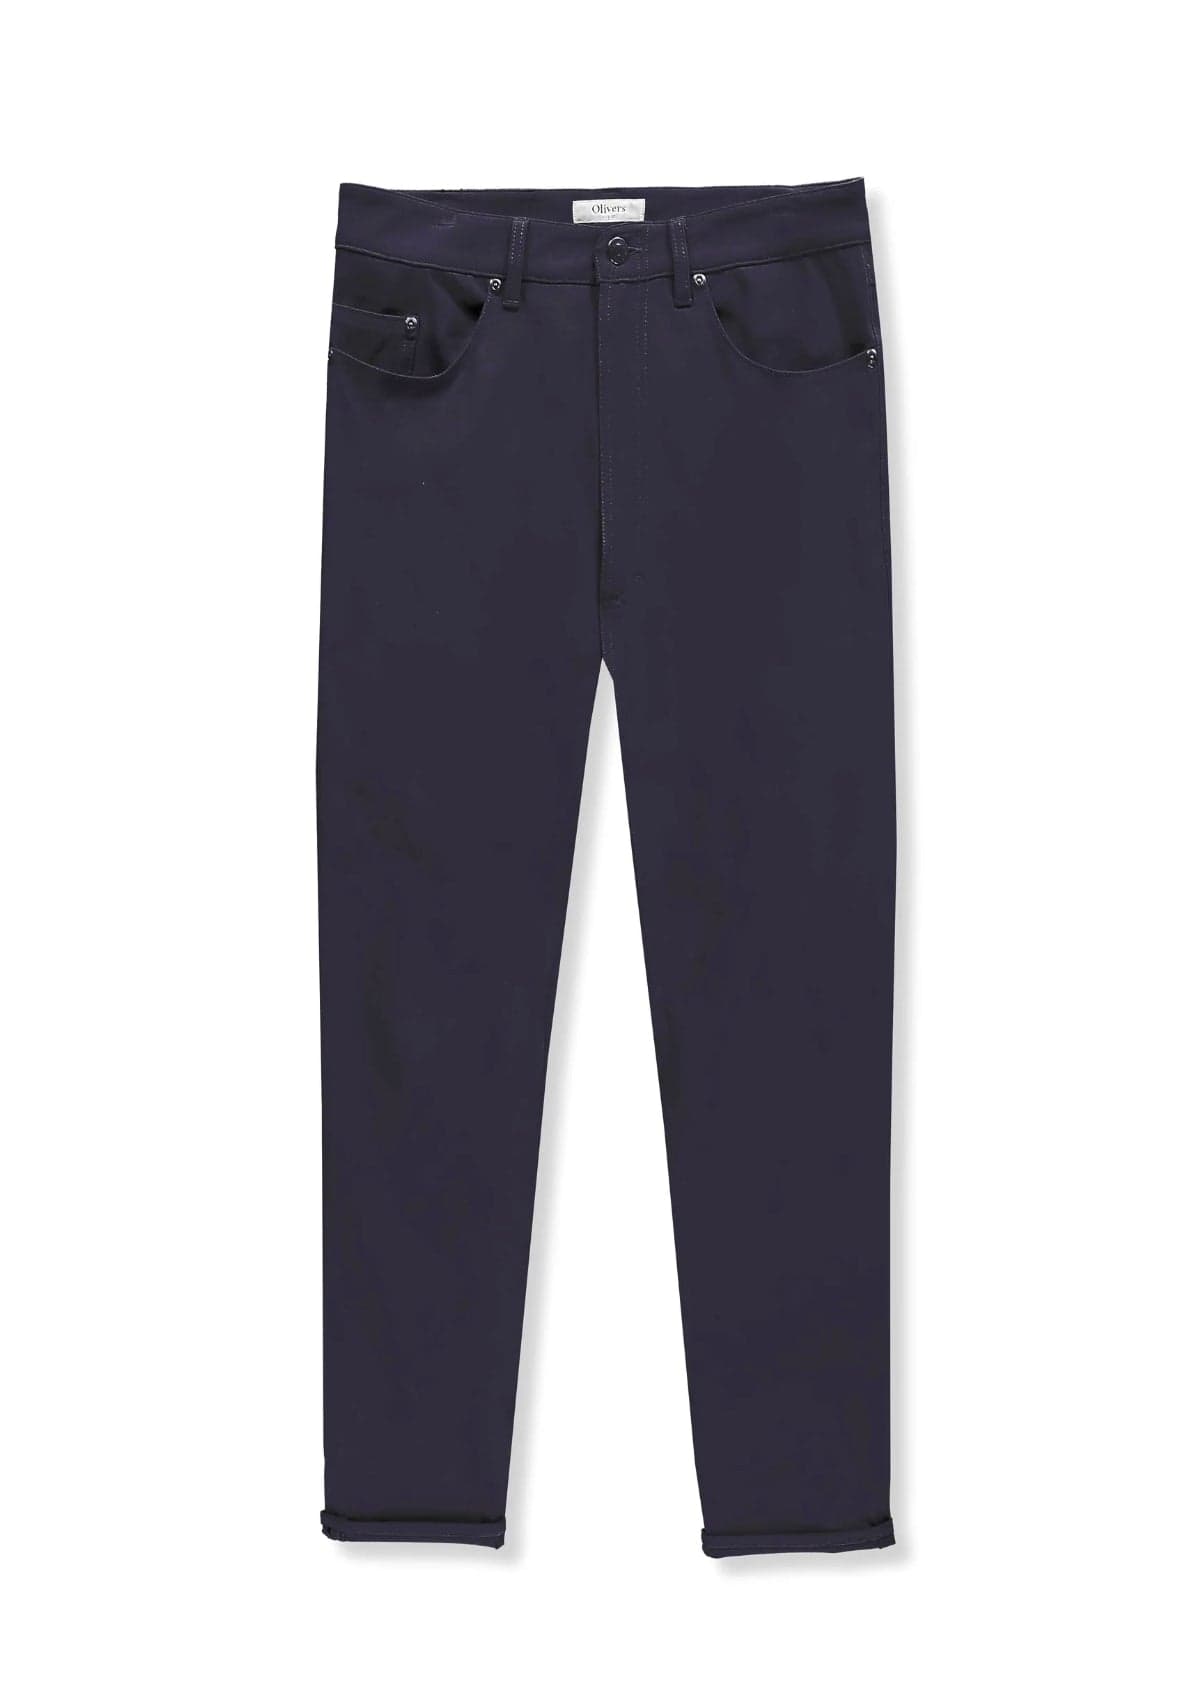 Olivers Downtown Pant - Dark Navy